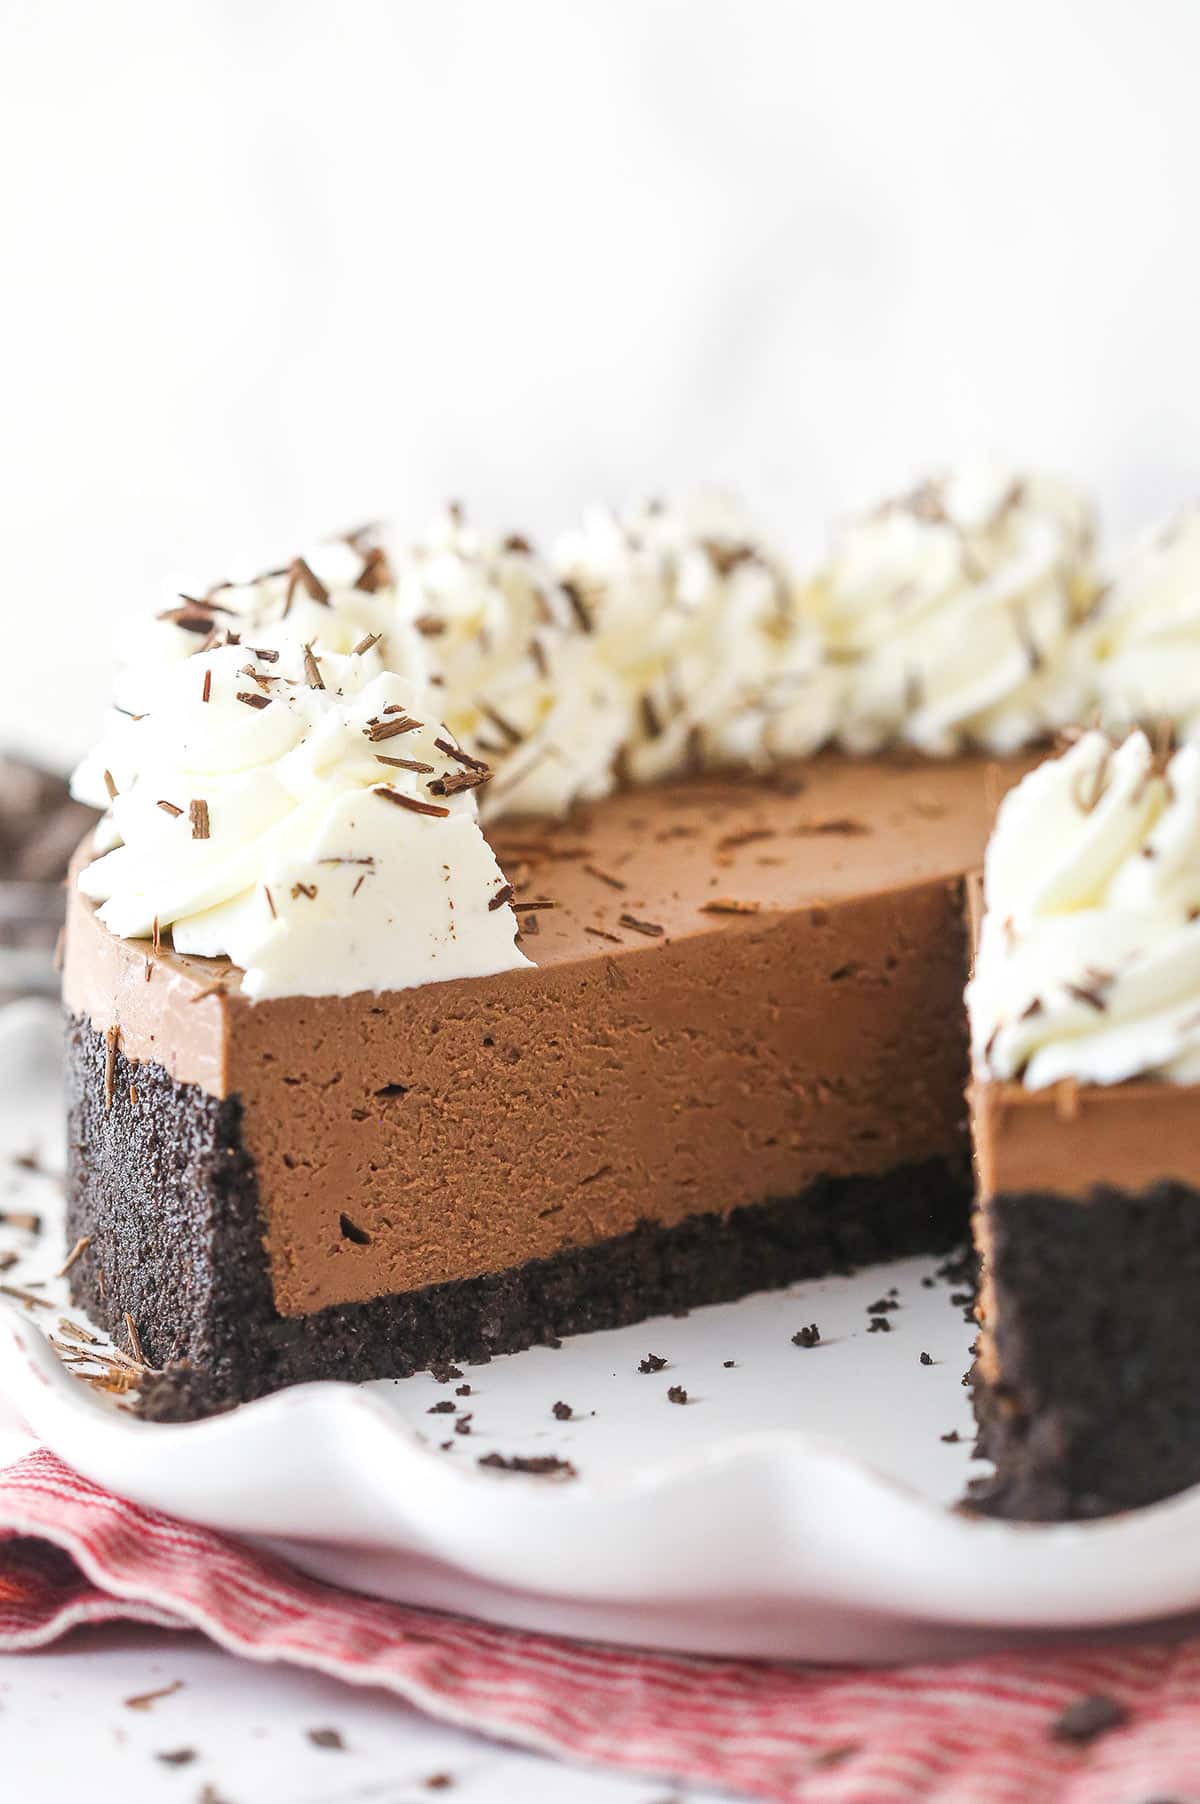 A No-Bake Chocolate Cheesecake on a white serving plate with a slice removed to show texture.